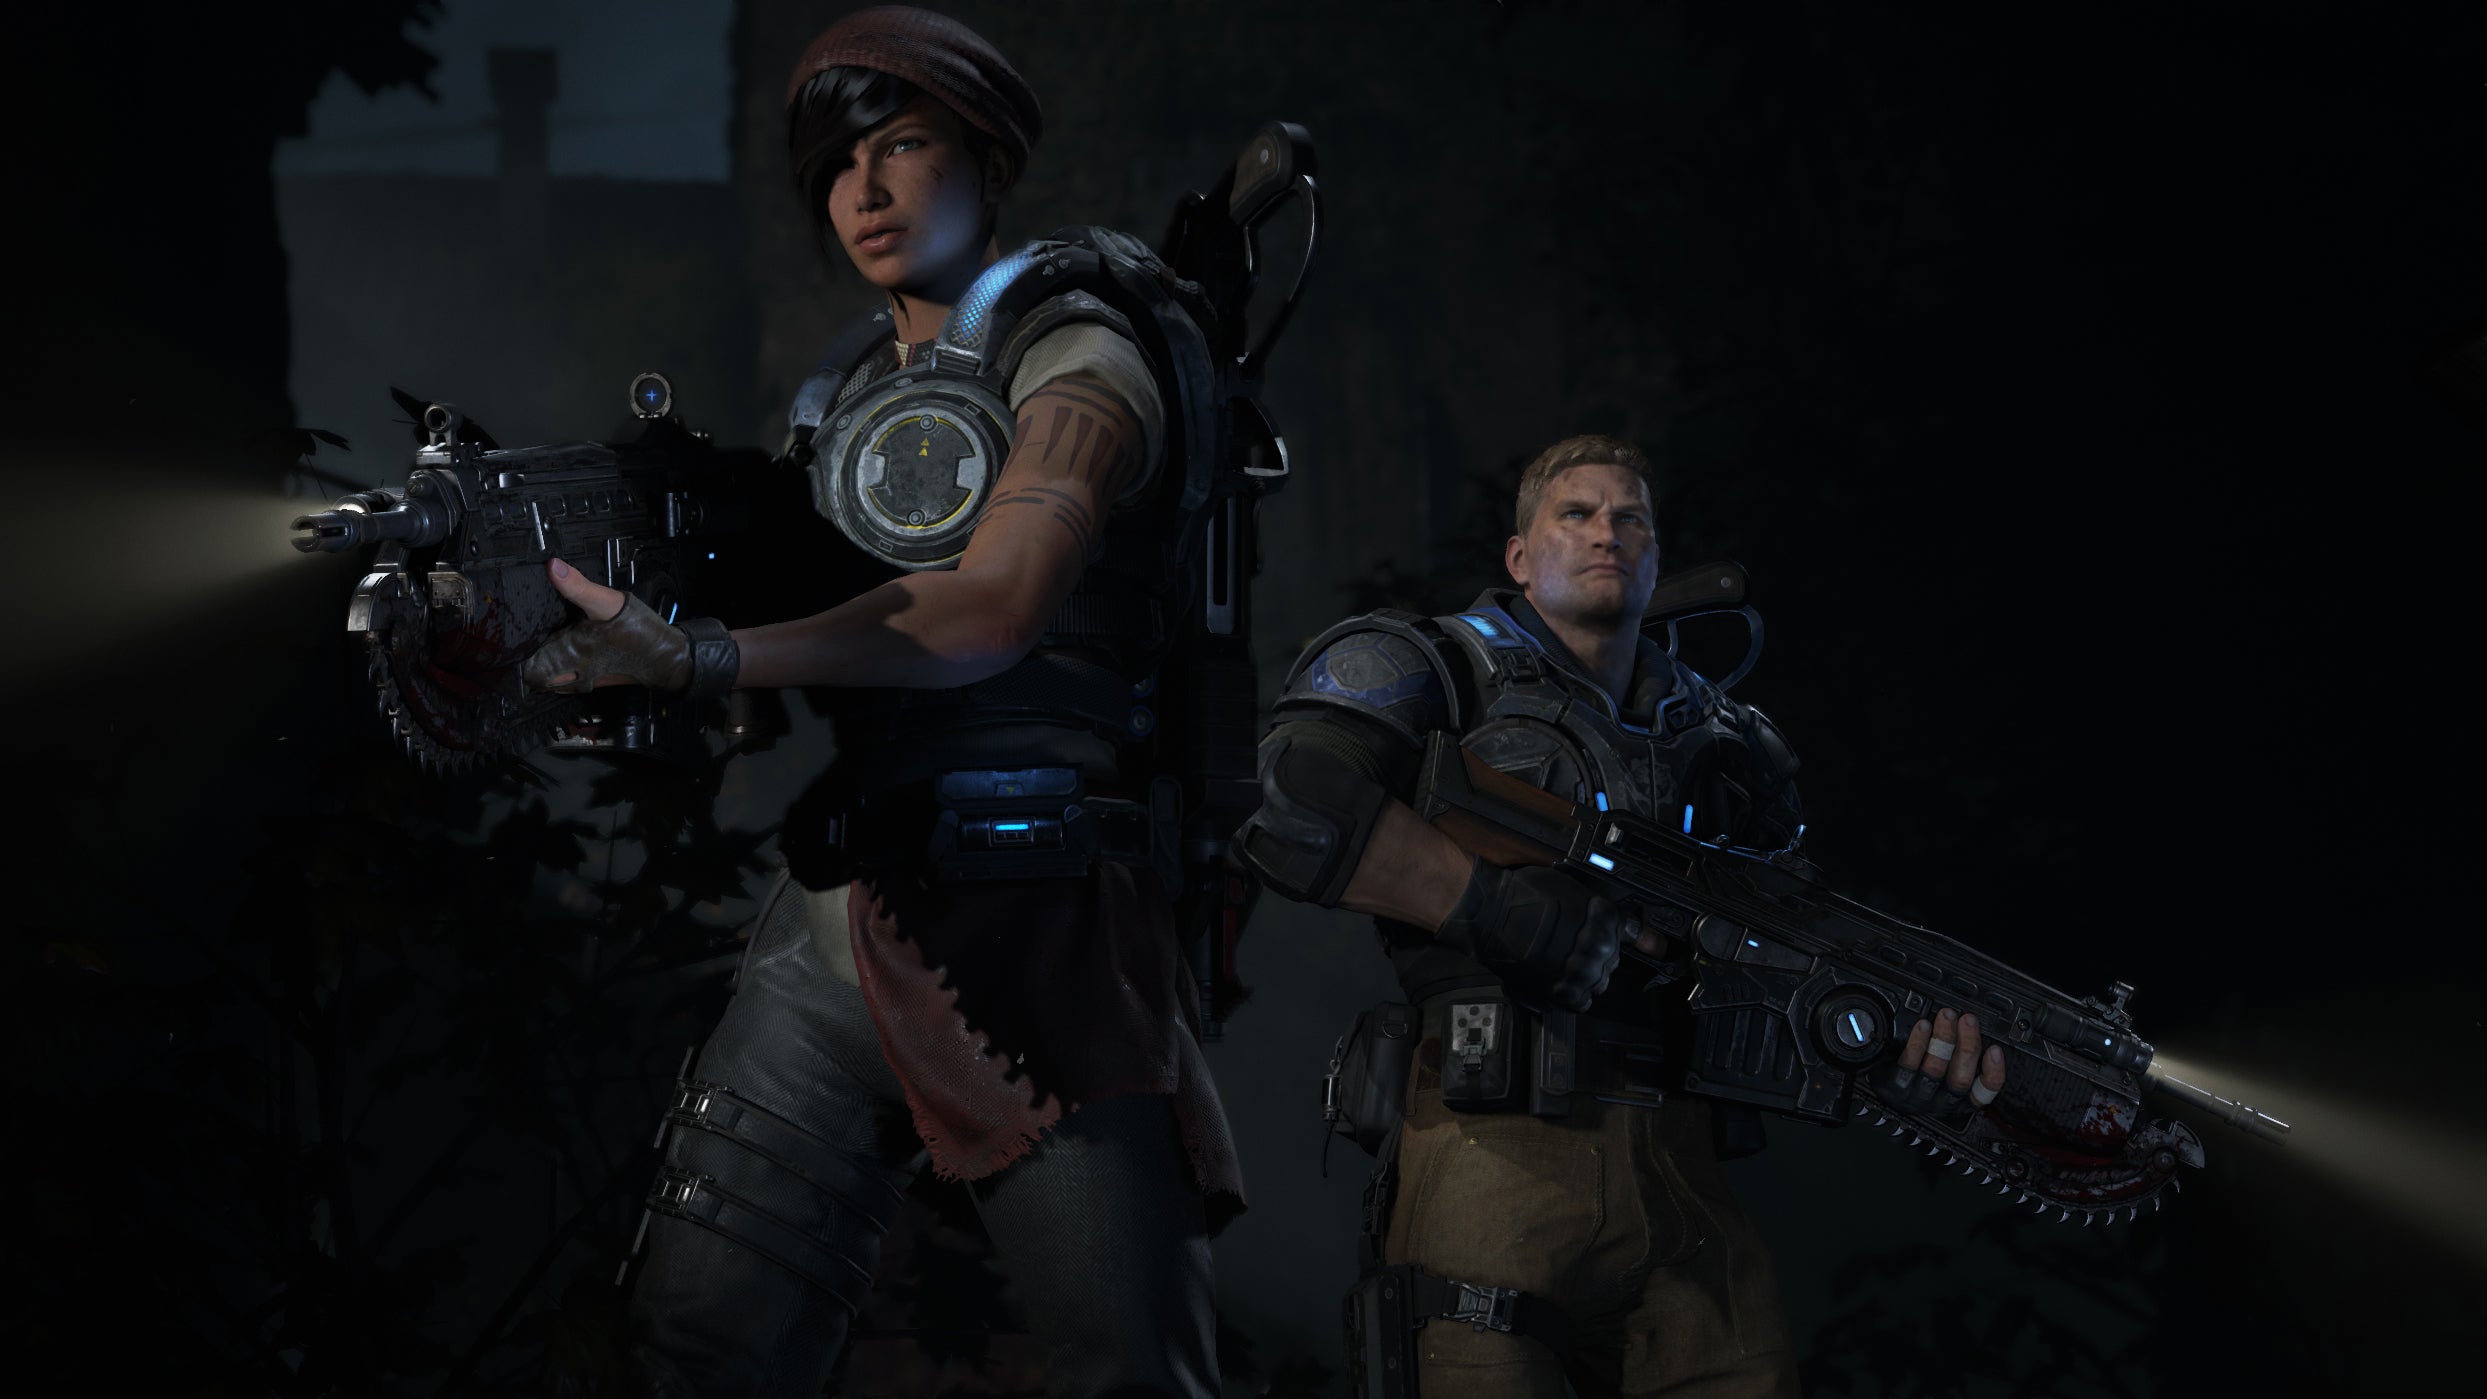 Image for Gears of War 4 to be a "graphical showcase" on Xbox One